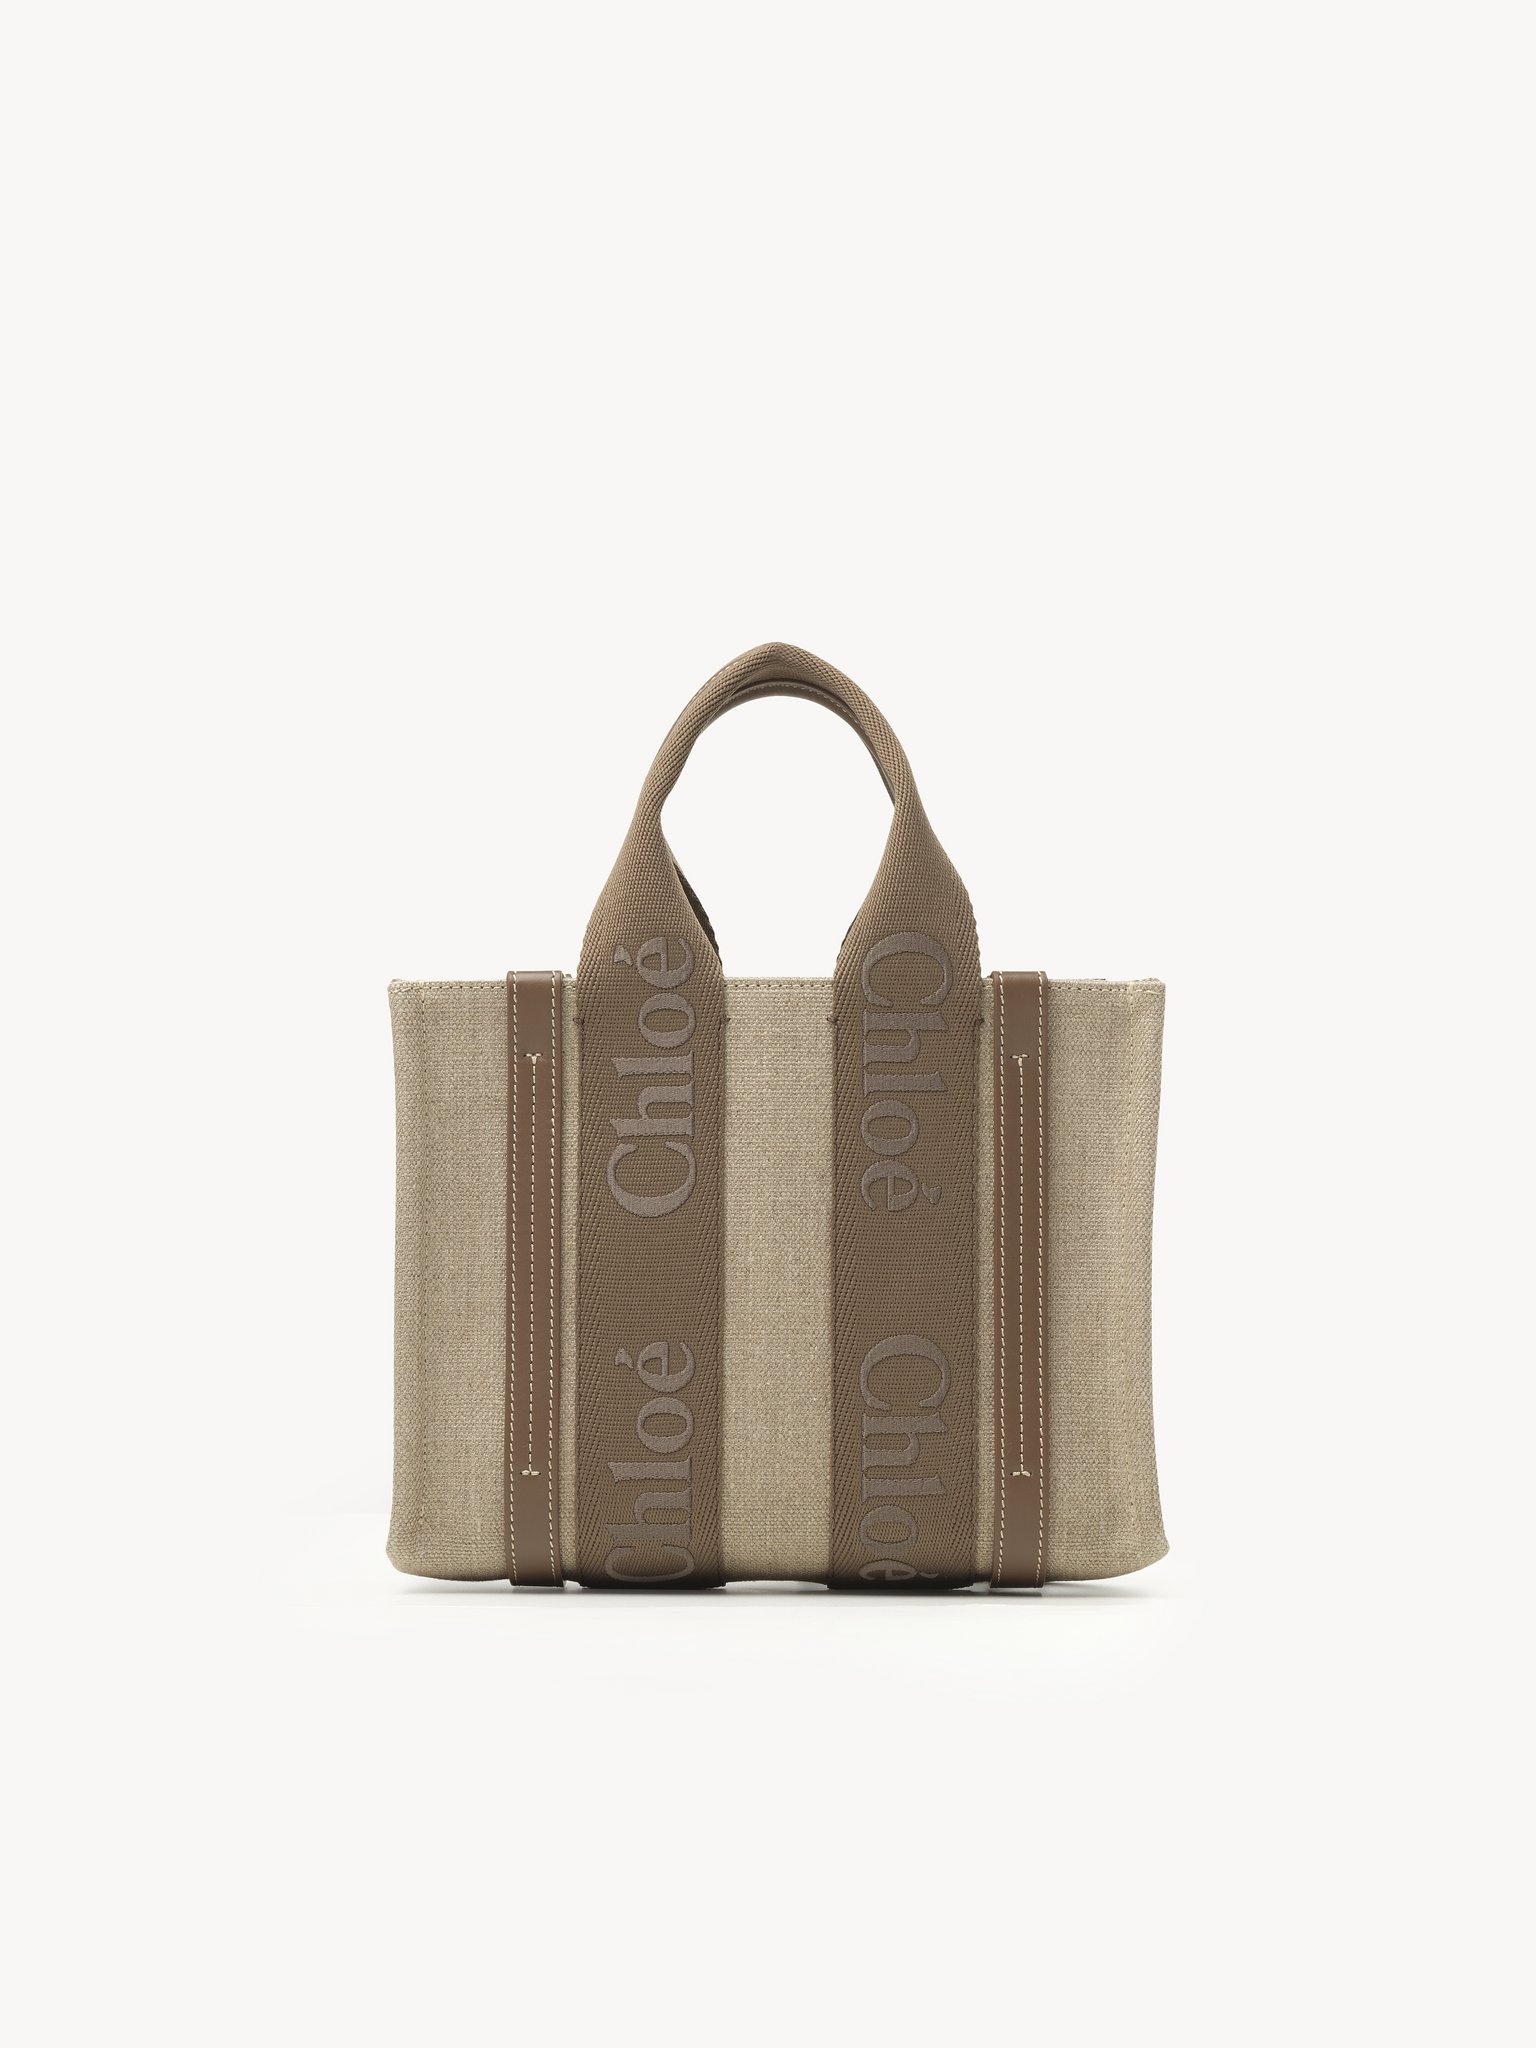 SMALL WOODY TOTE BAG IN LINEN - 4